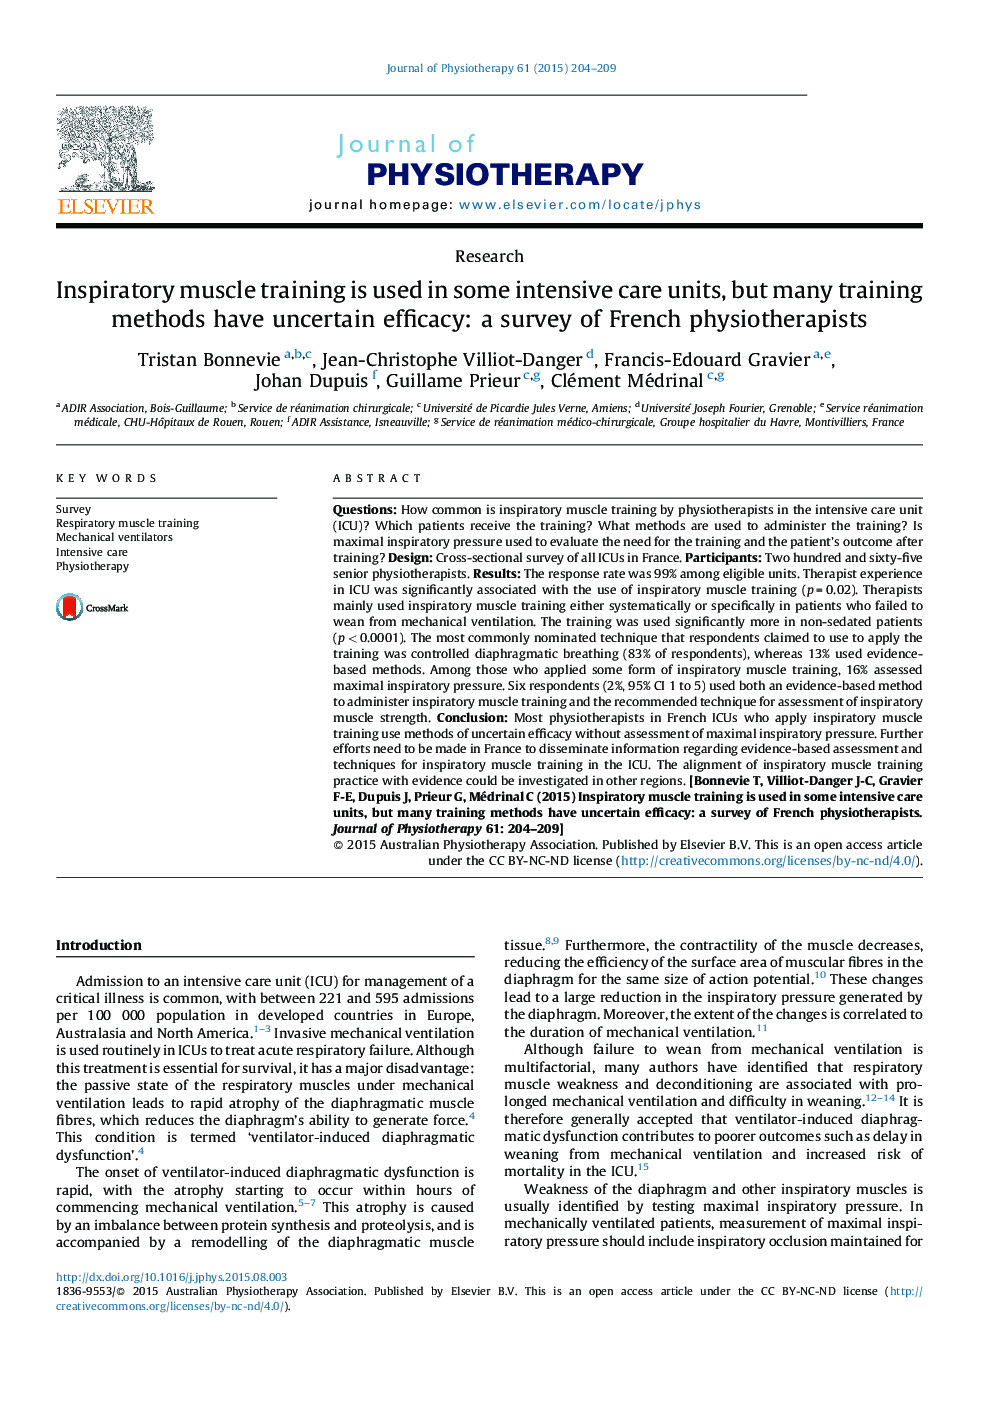 Inspiratory muscle training is used in some intensive care units, but many training methods have uncertain efficacy: a survey of French physiotherapists